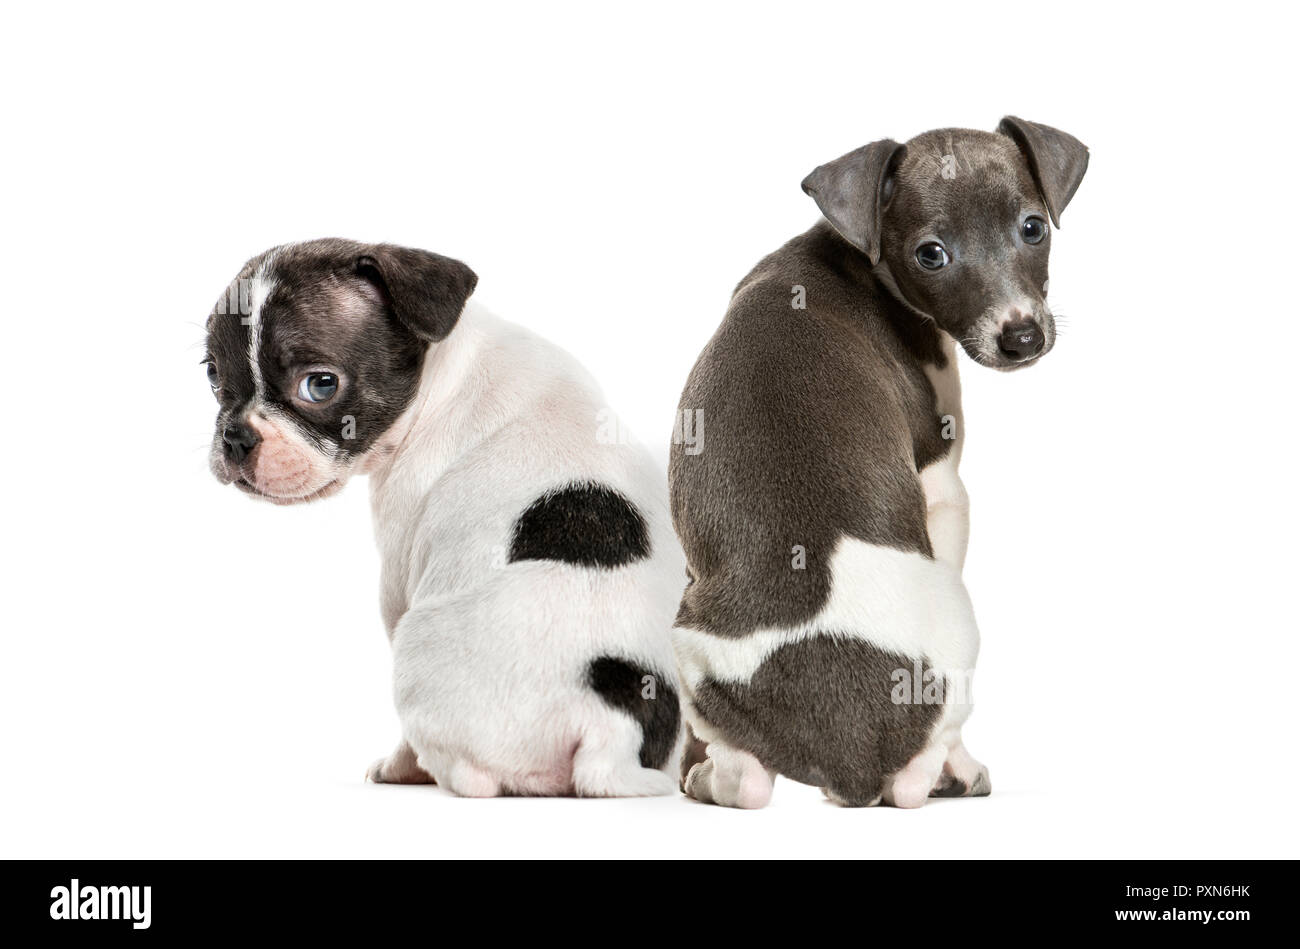 Italian Greyhound Puppy High Resolution Stock Photography and Images - Alamy